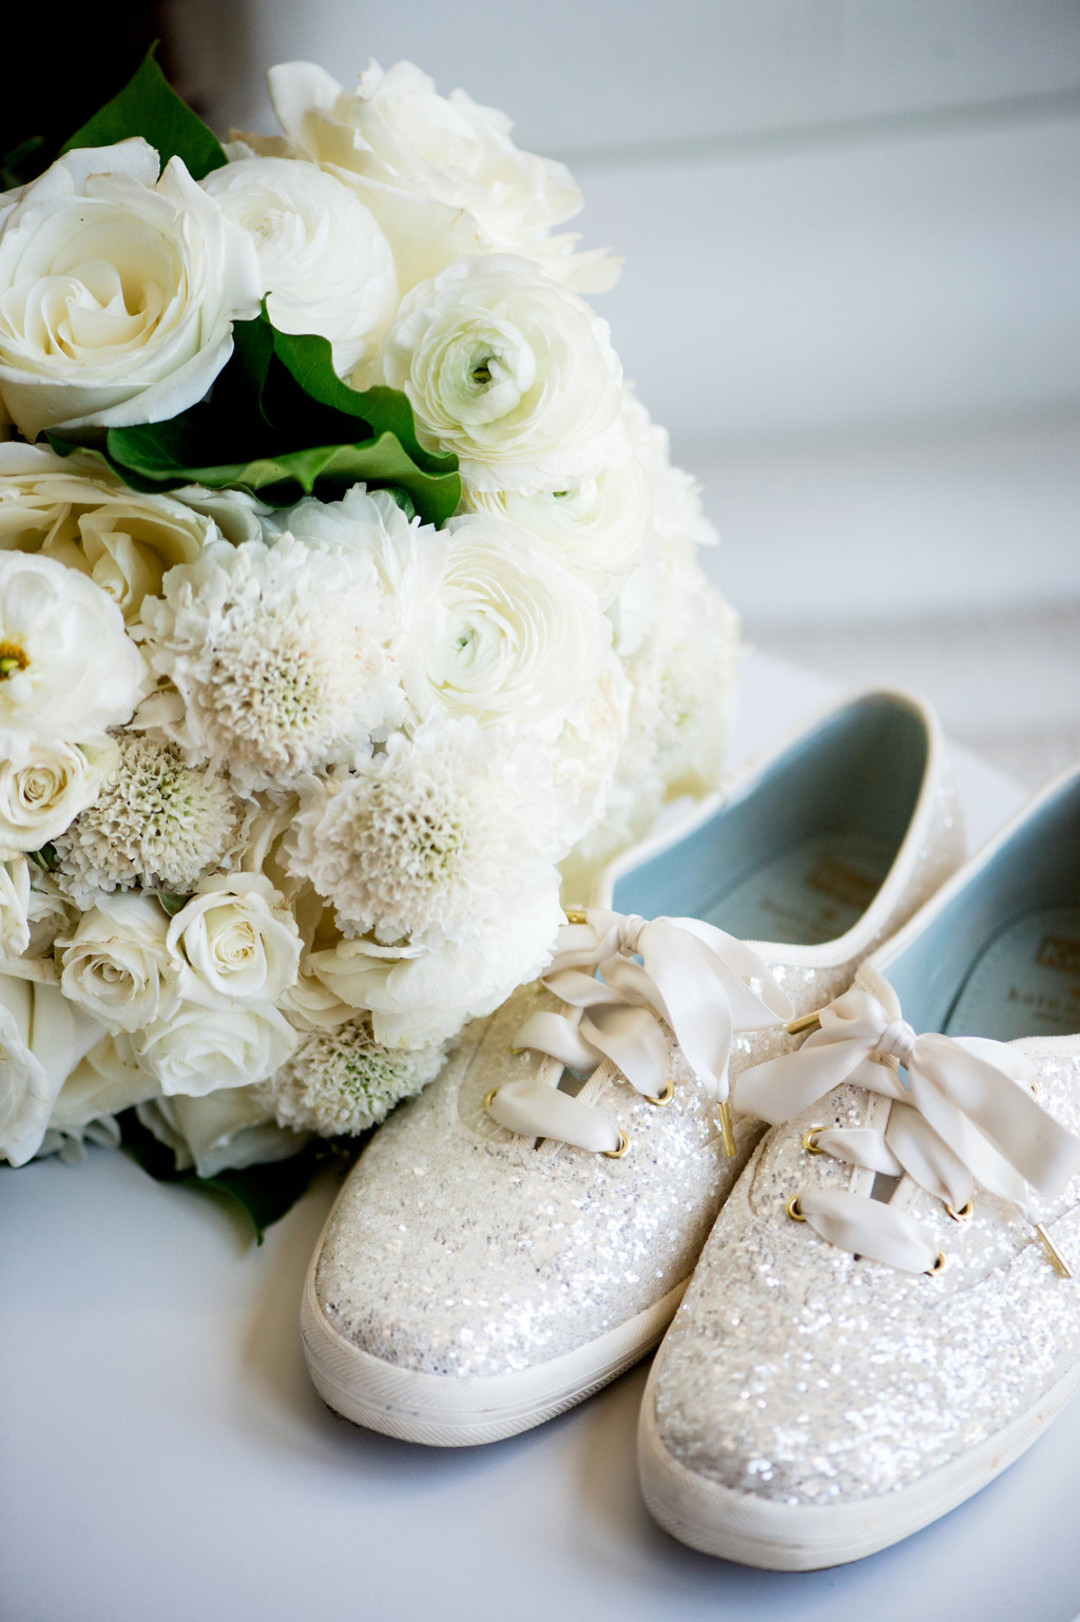 Kate Spade Keds: Vibrant Chicago wedding captured by Julia Franzosa Photography. See more colorful wedding ideas at CHItheeWED.com! 